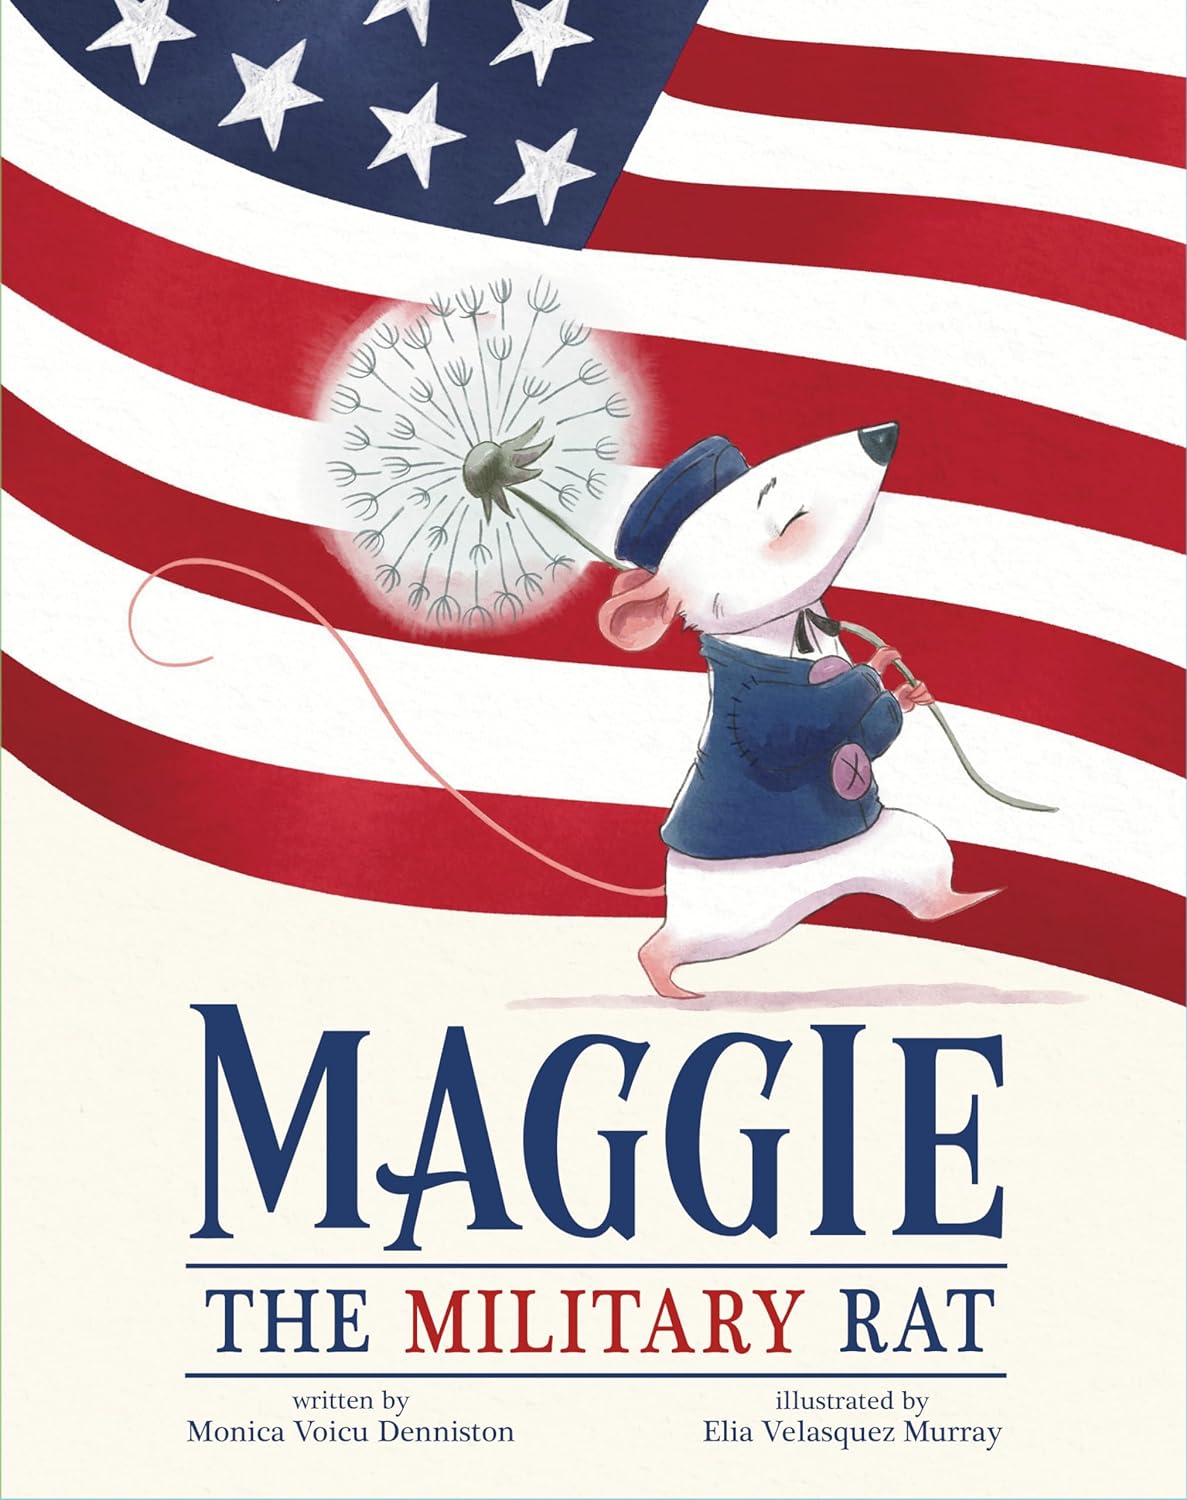 Maggie the Military Rat